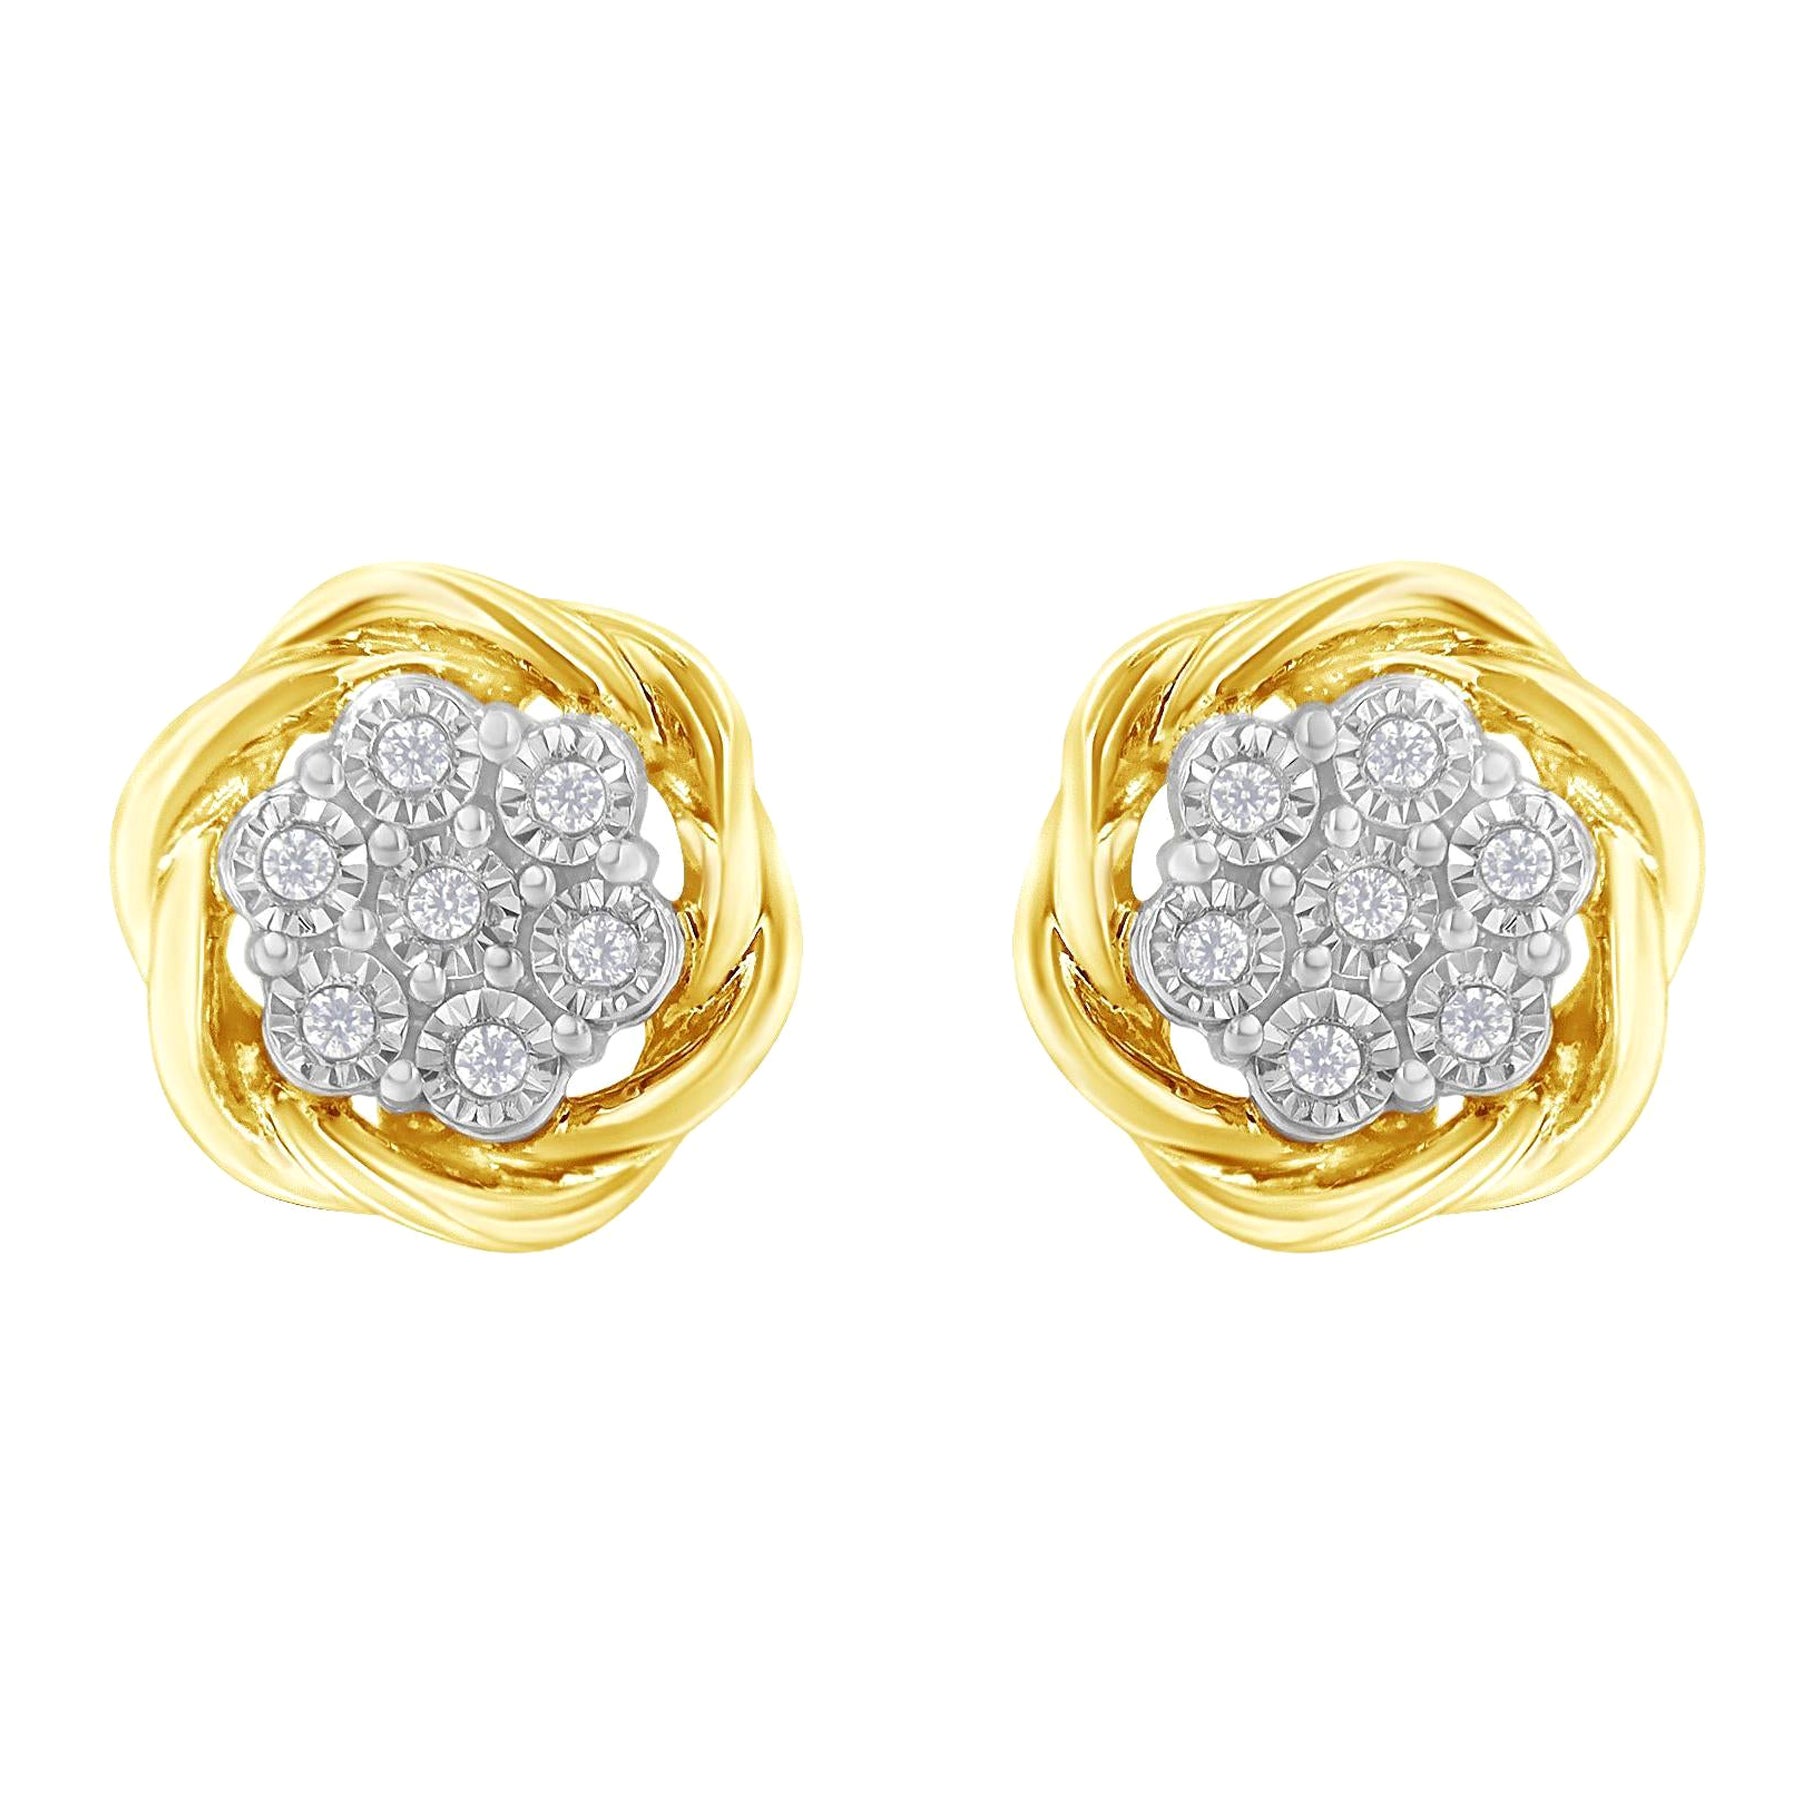 Yellow Gold Plated Sterling Silver 1/6 Carat Diamond Rose Stud Earrings